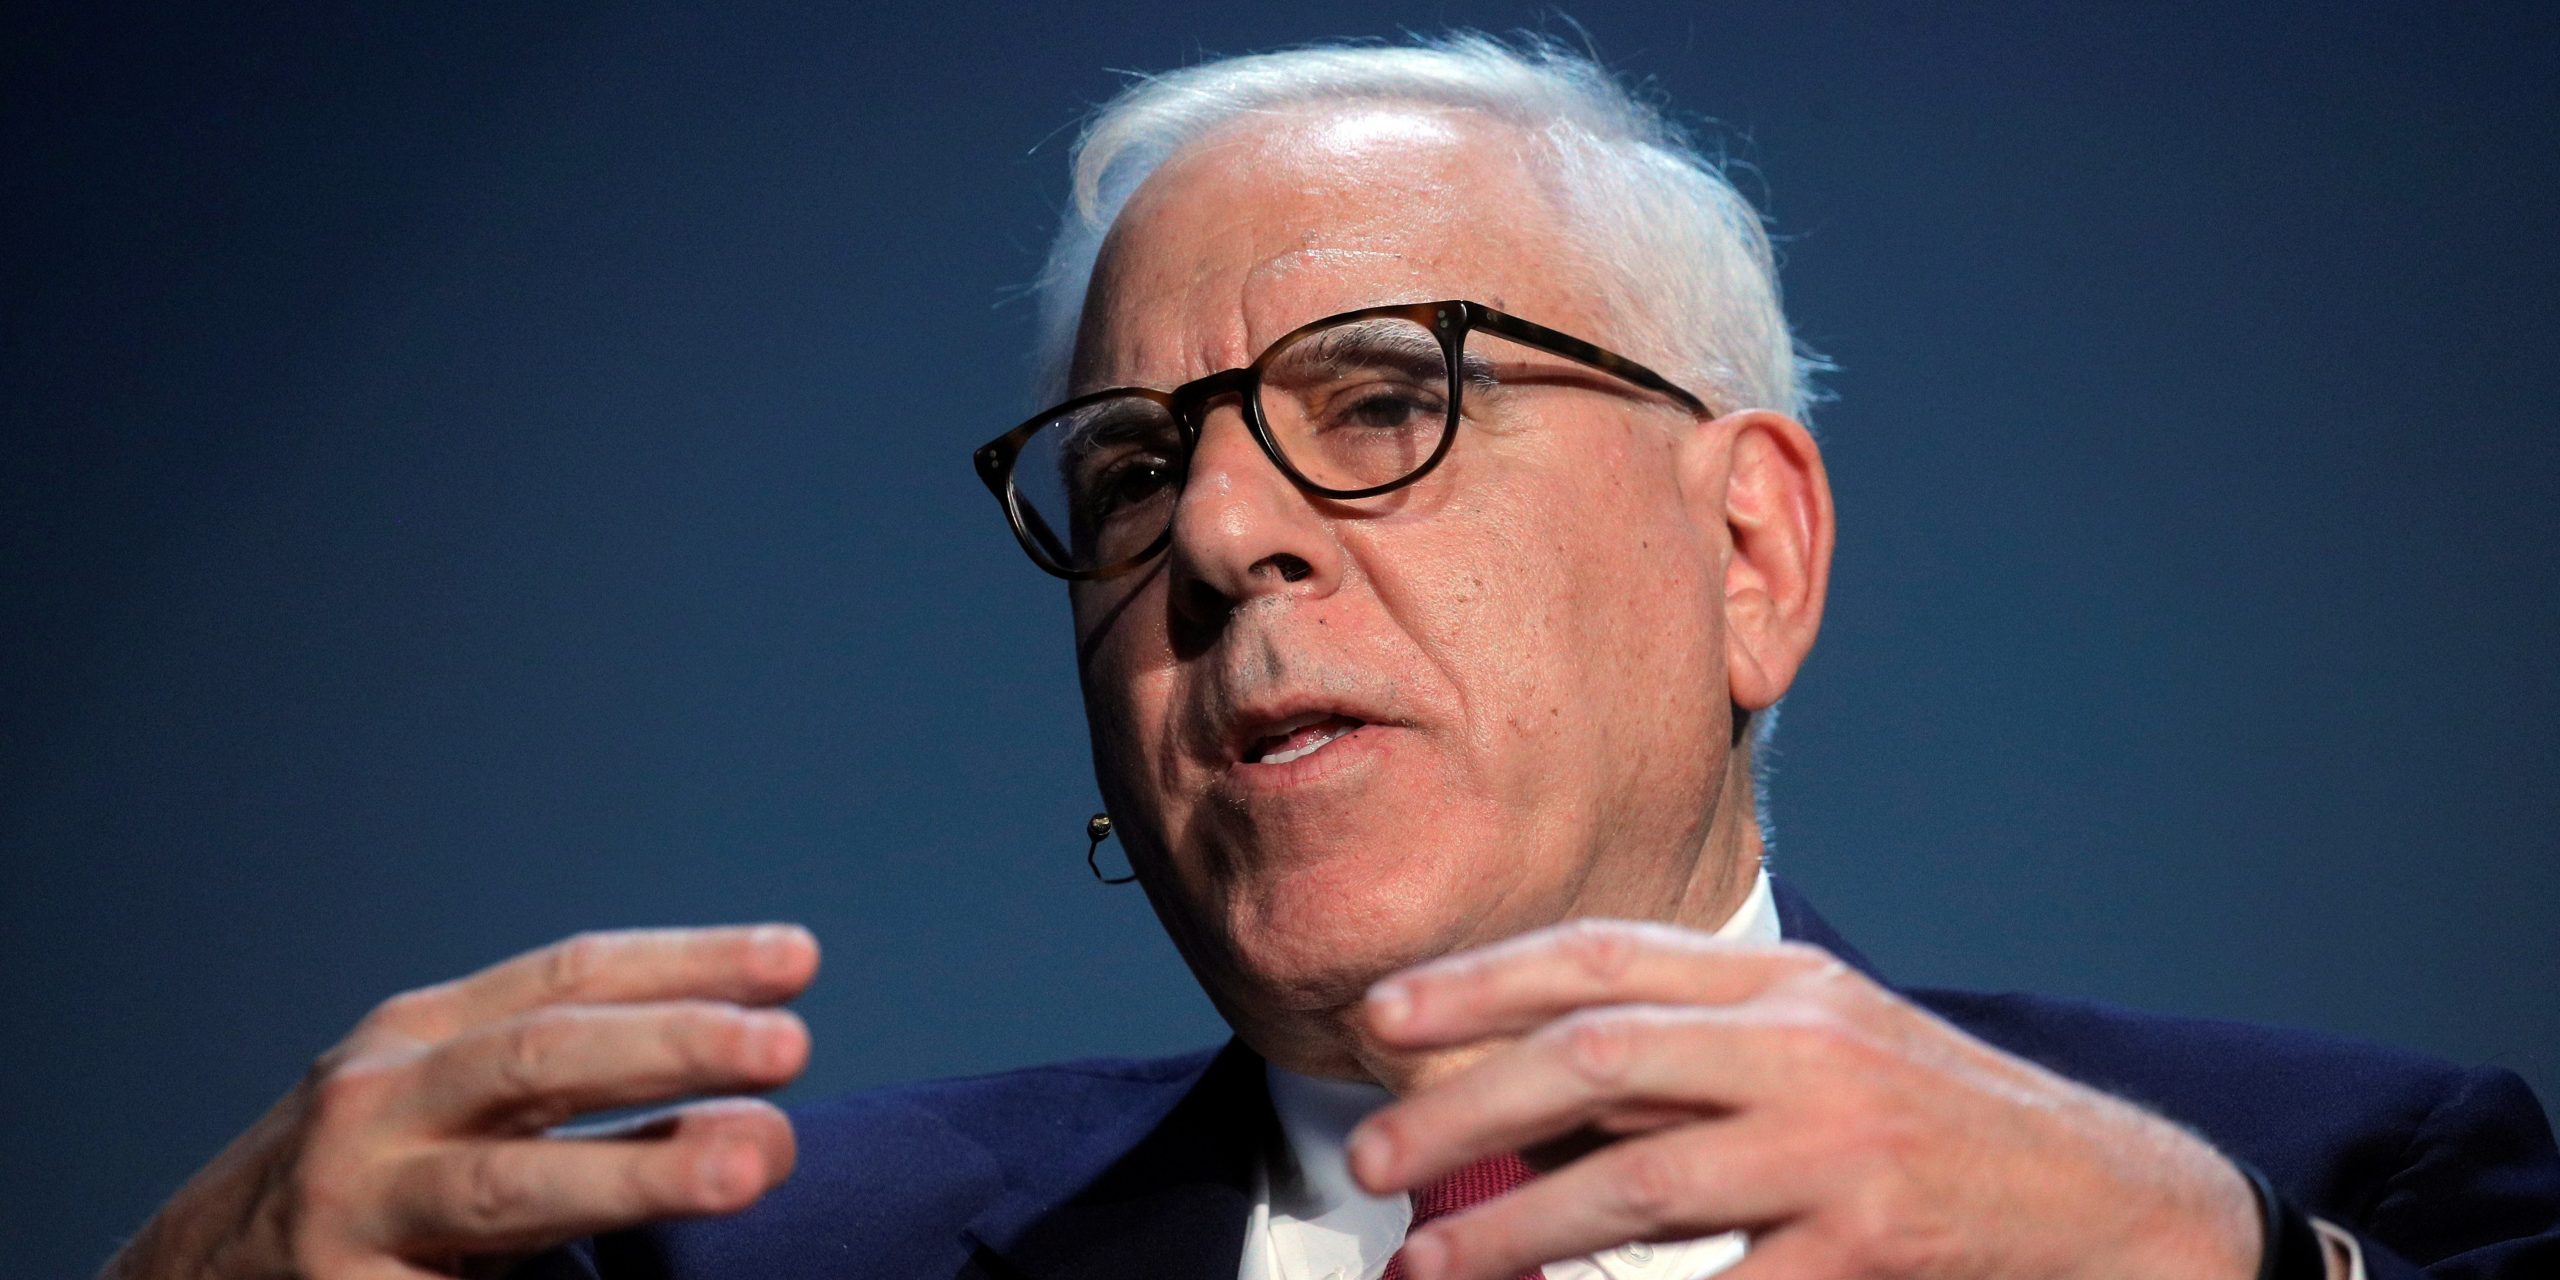 David Rubenstein, Co-Founder and Co-CEO of Carlyle Group, speaks during the Skybridge Capital SALT New York 2021 conference in New York City, U.S., September 13, 2021.